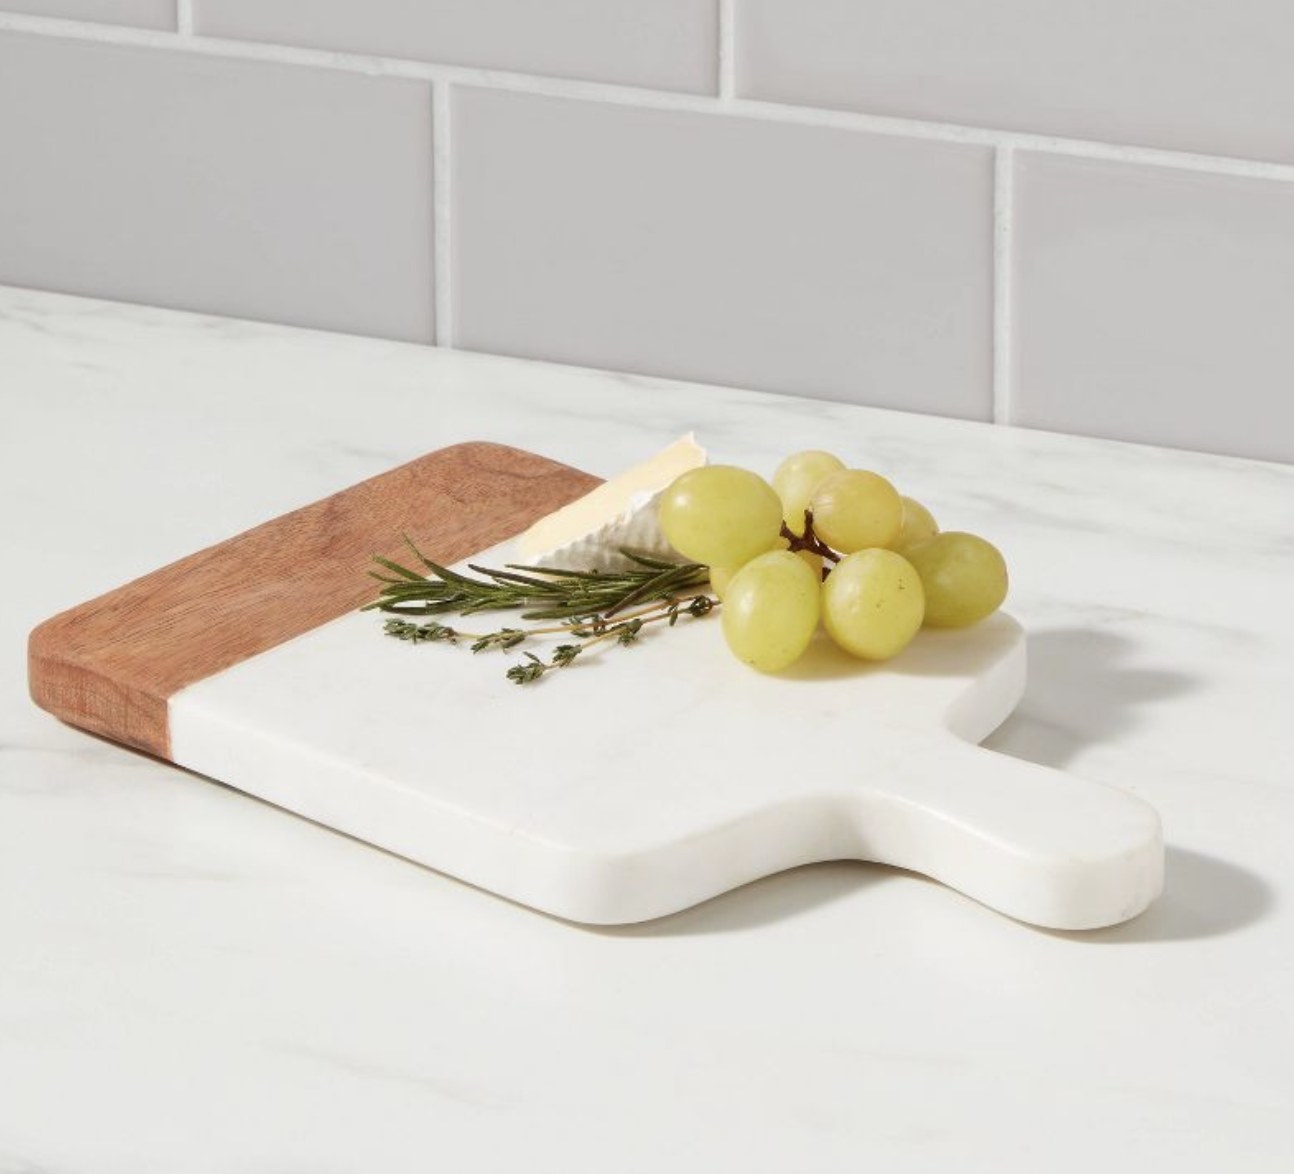 A marble and wood serving board